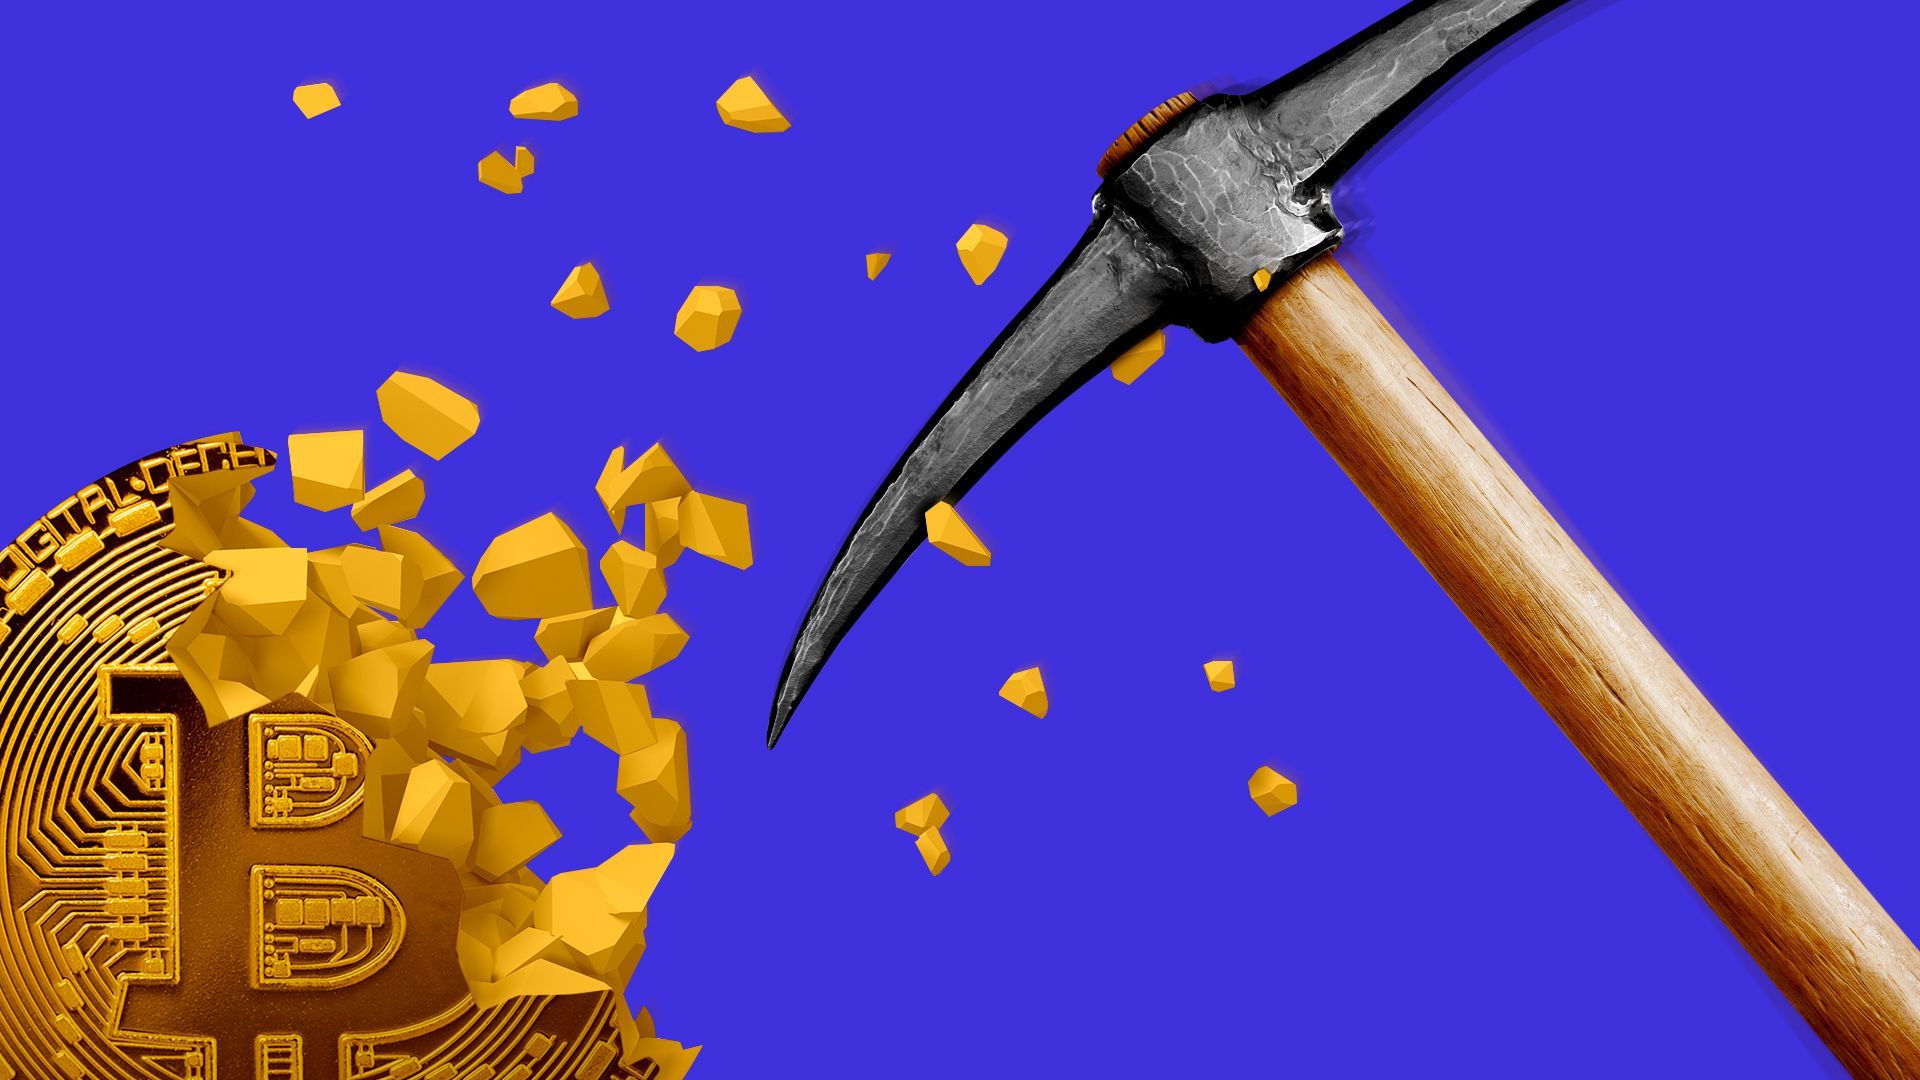 Illustration of a pick axe hitting a Bitcoin with pieces flying everywhere. 